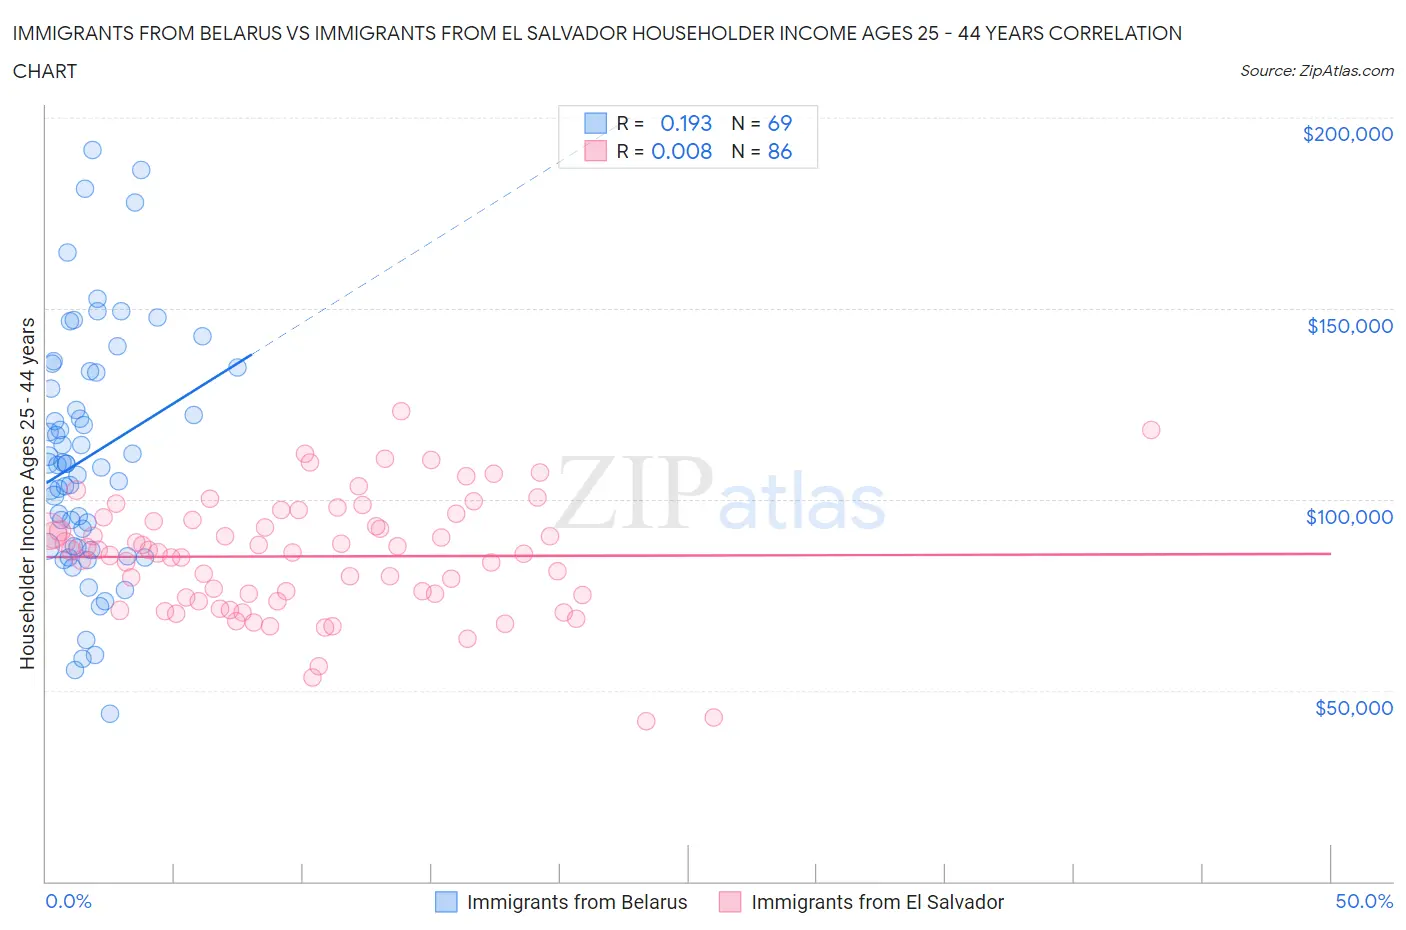 Immigrants from Belarus vs Immigrants from El Salvador Householder Income Ages 25 - 44 years